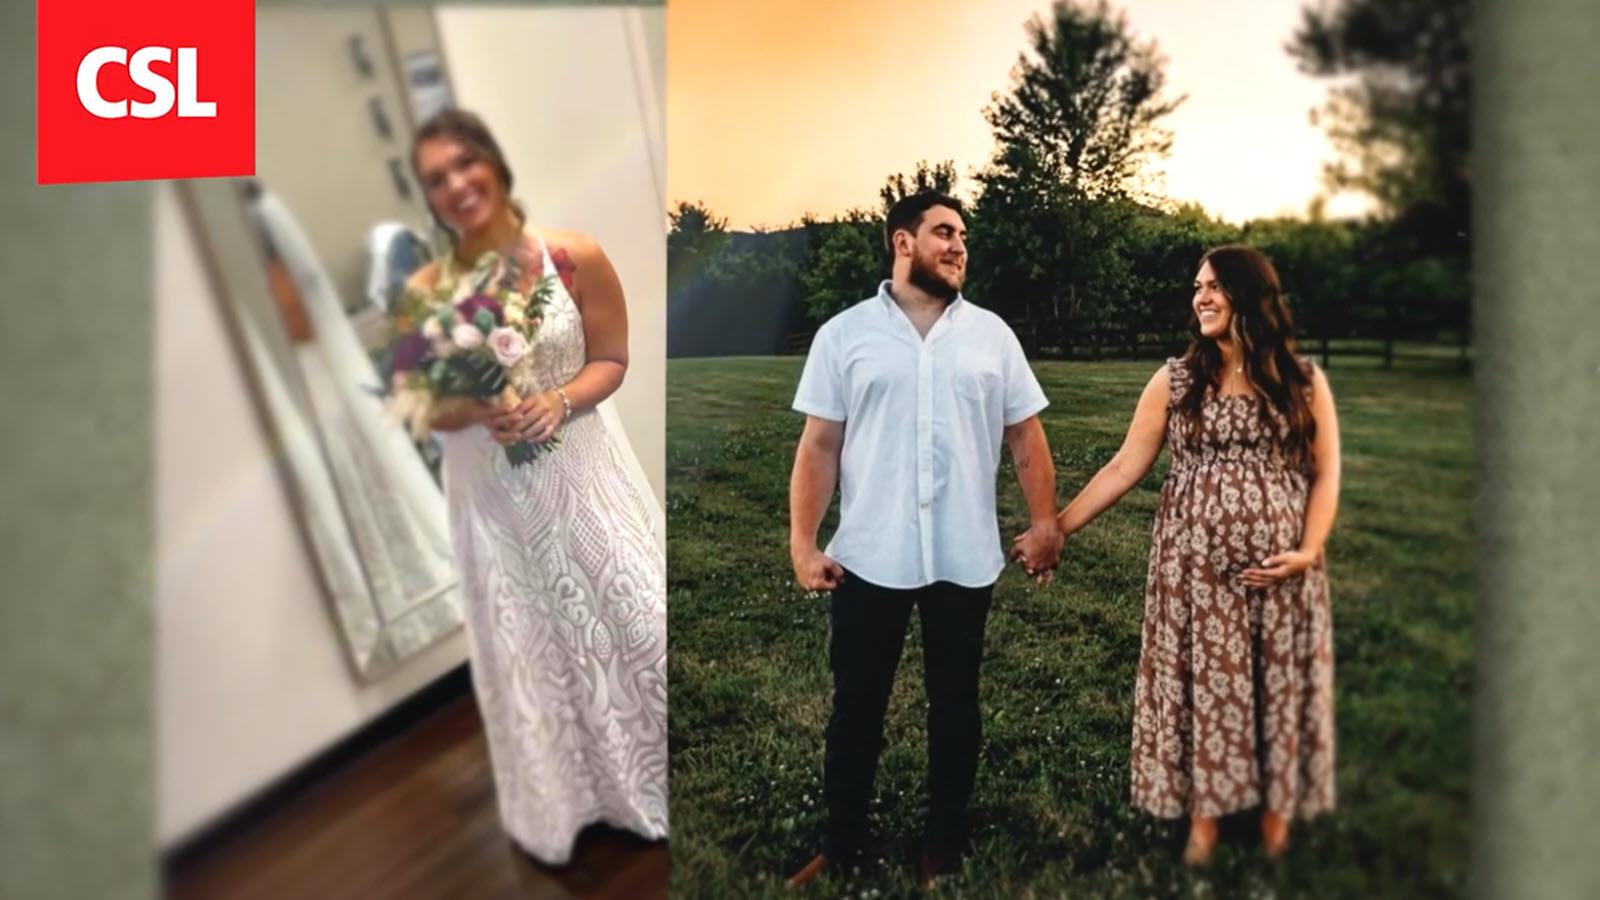 Photos of HAE patient Lexi on her wedding day and during her pregnancy